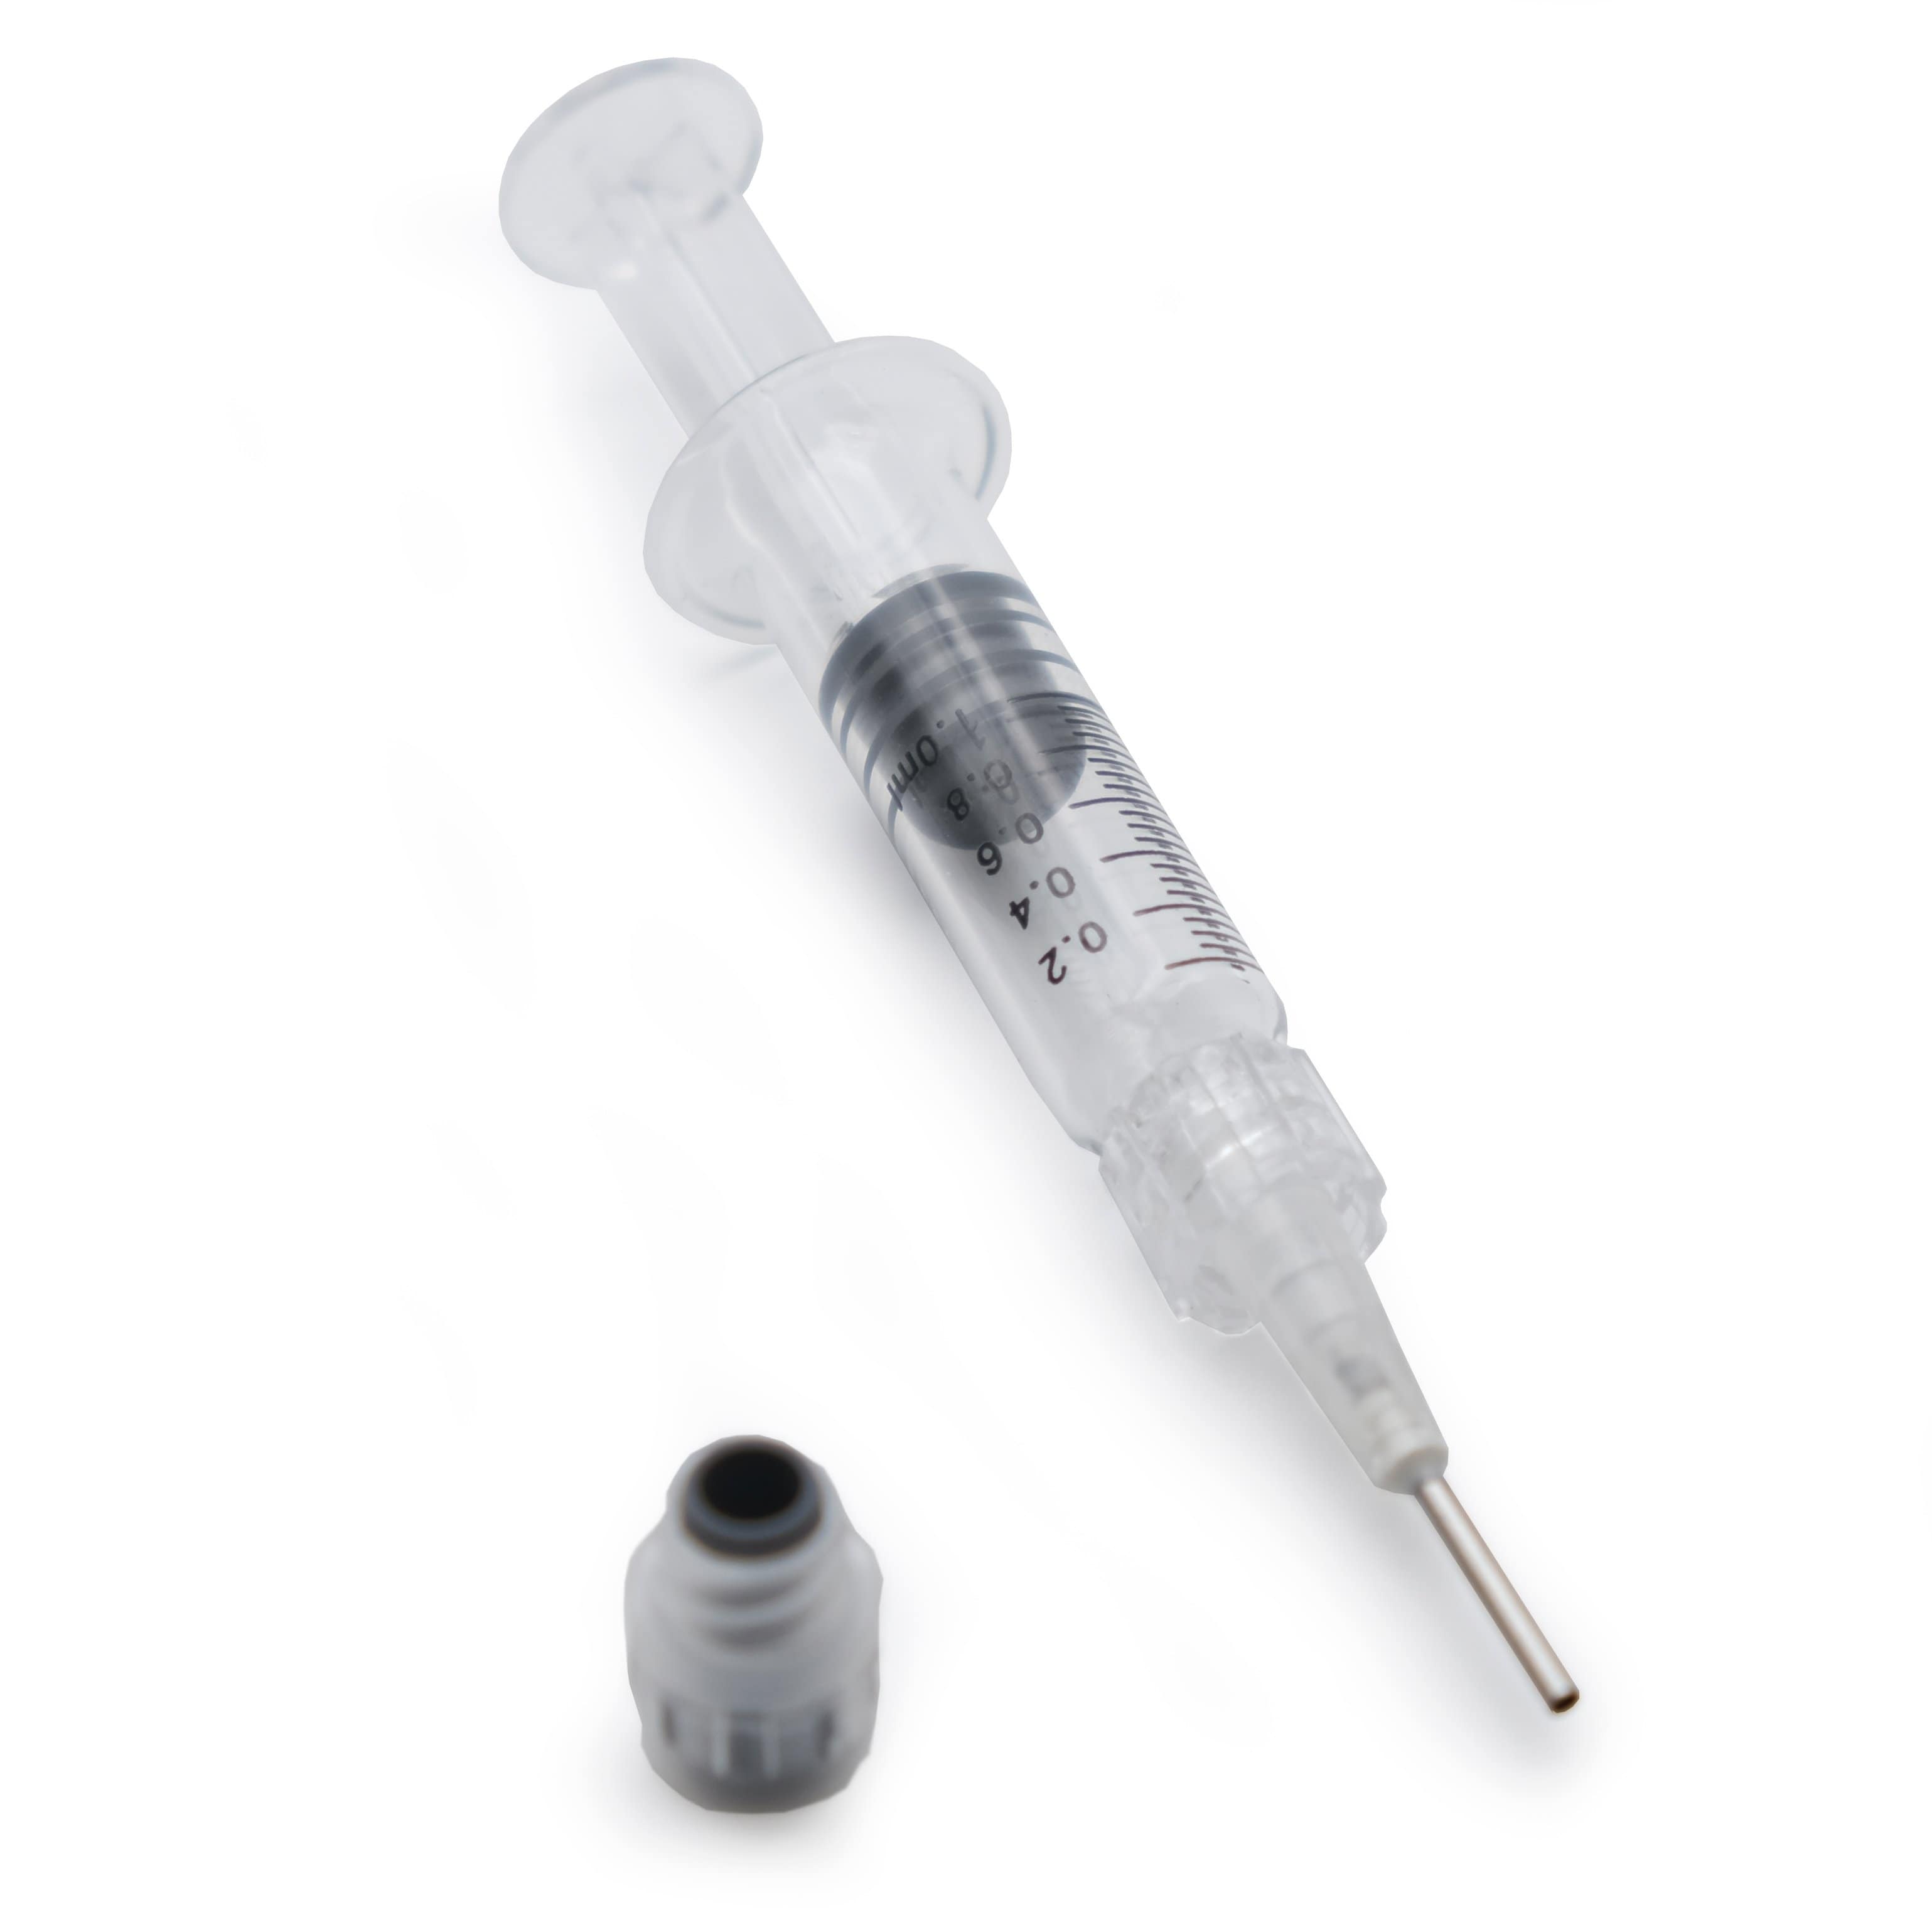 1ml Glass Syringe with Luer Lock System and Needle